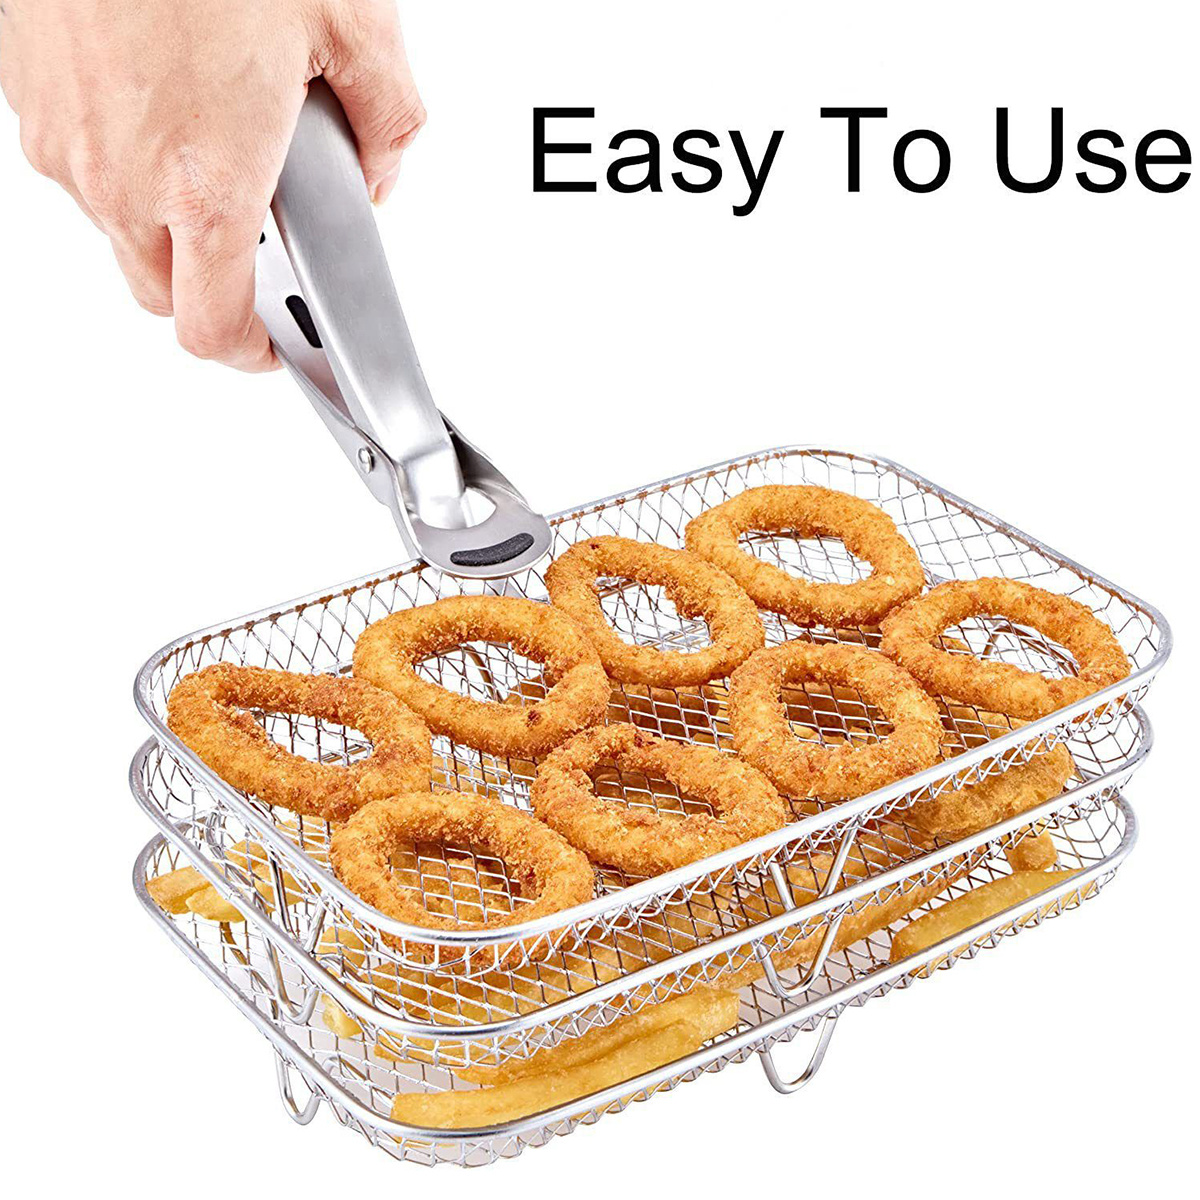 3pcs, Air Fryer Three Stackable Dehydrator Racks Air Fryer Basket Tray Air  Fryer Accessories Dishwasher Safe Fit For Oven And Press Cooker Stainless  Steel Fit all 4.2QT - 5.8QT air fryer,Oven,Pressure Cooker